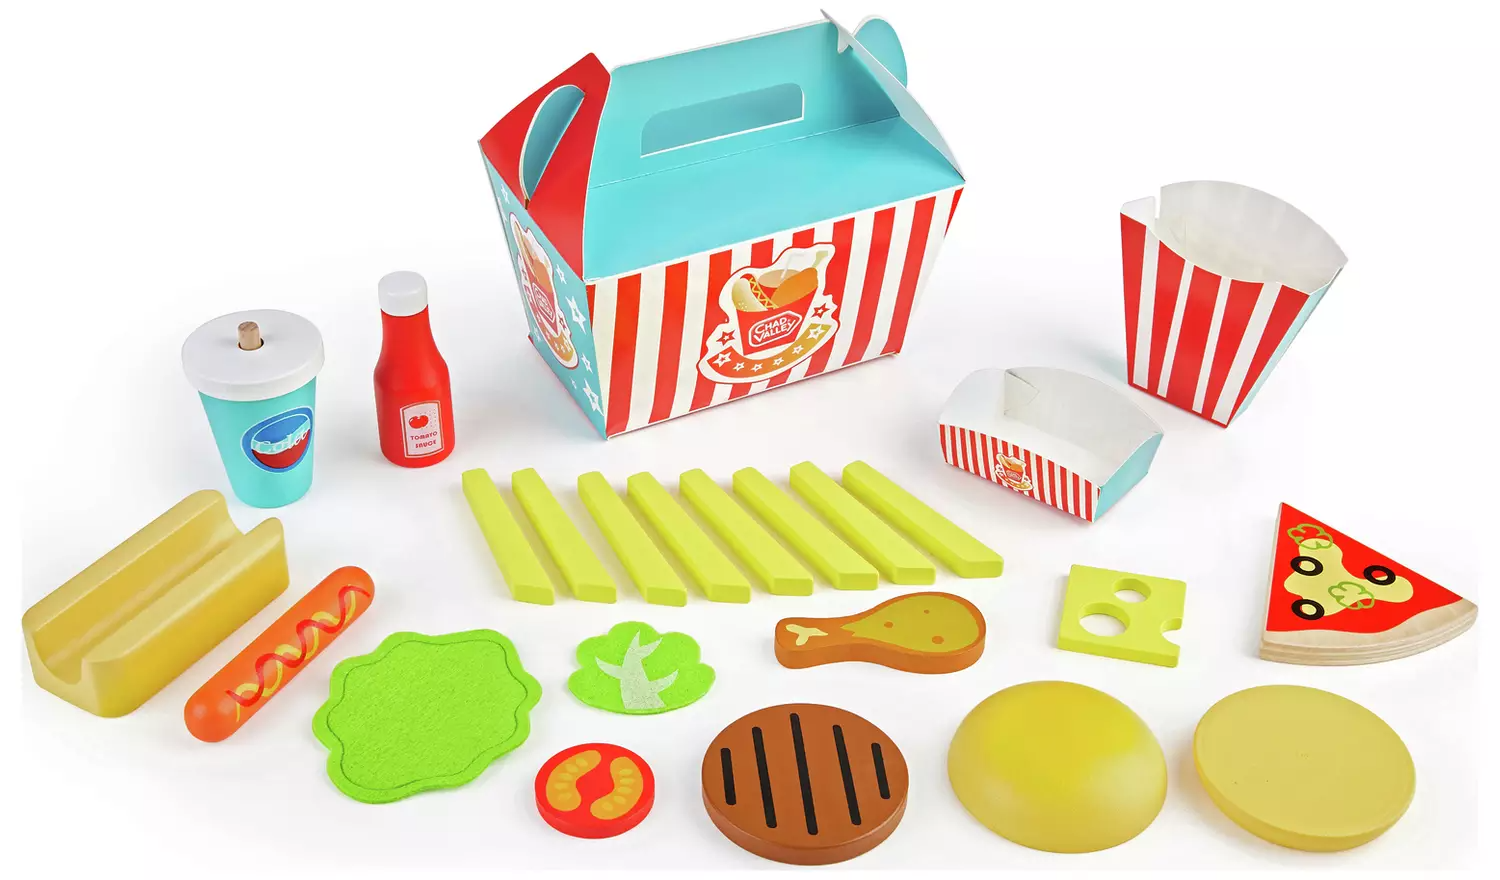 Chad Valley Wooden Burger Gift Set